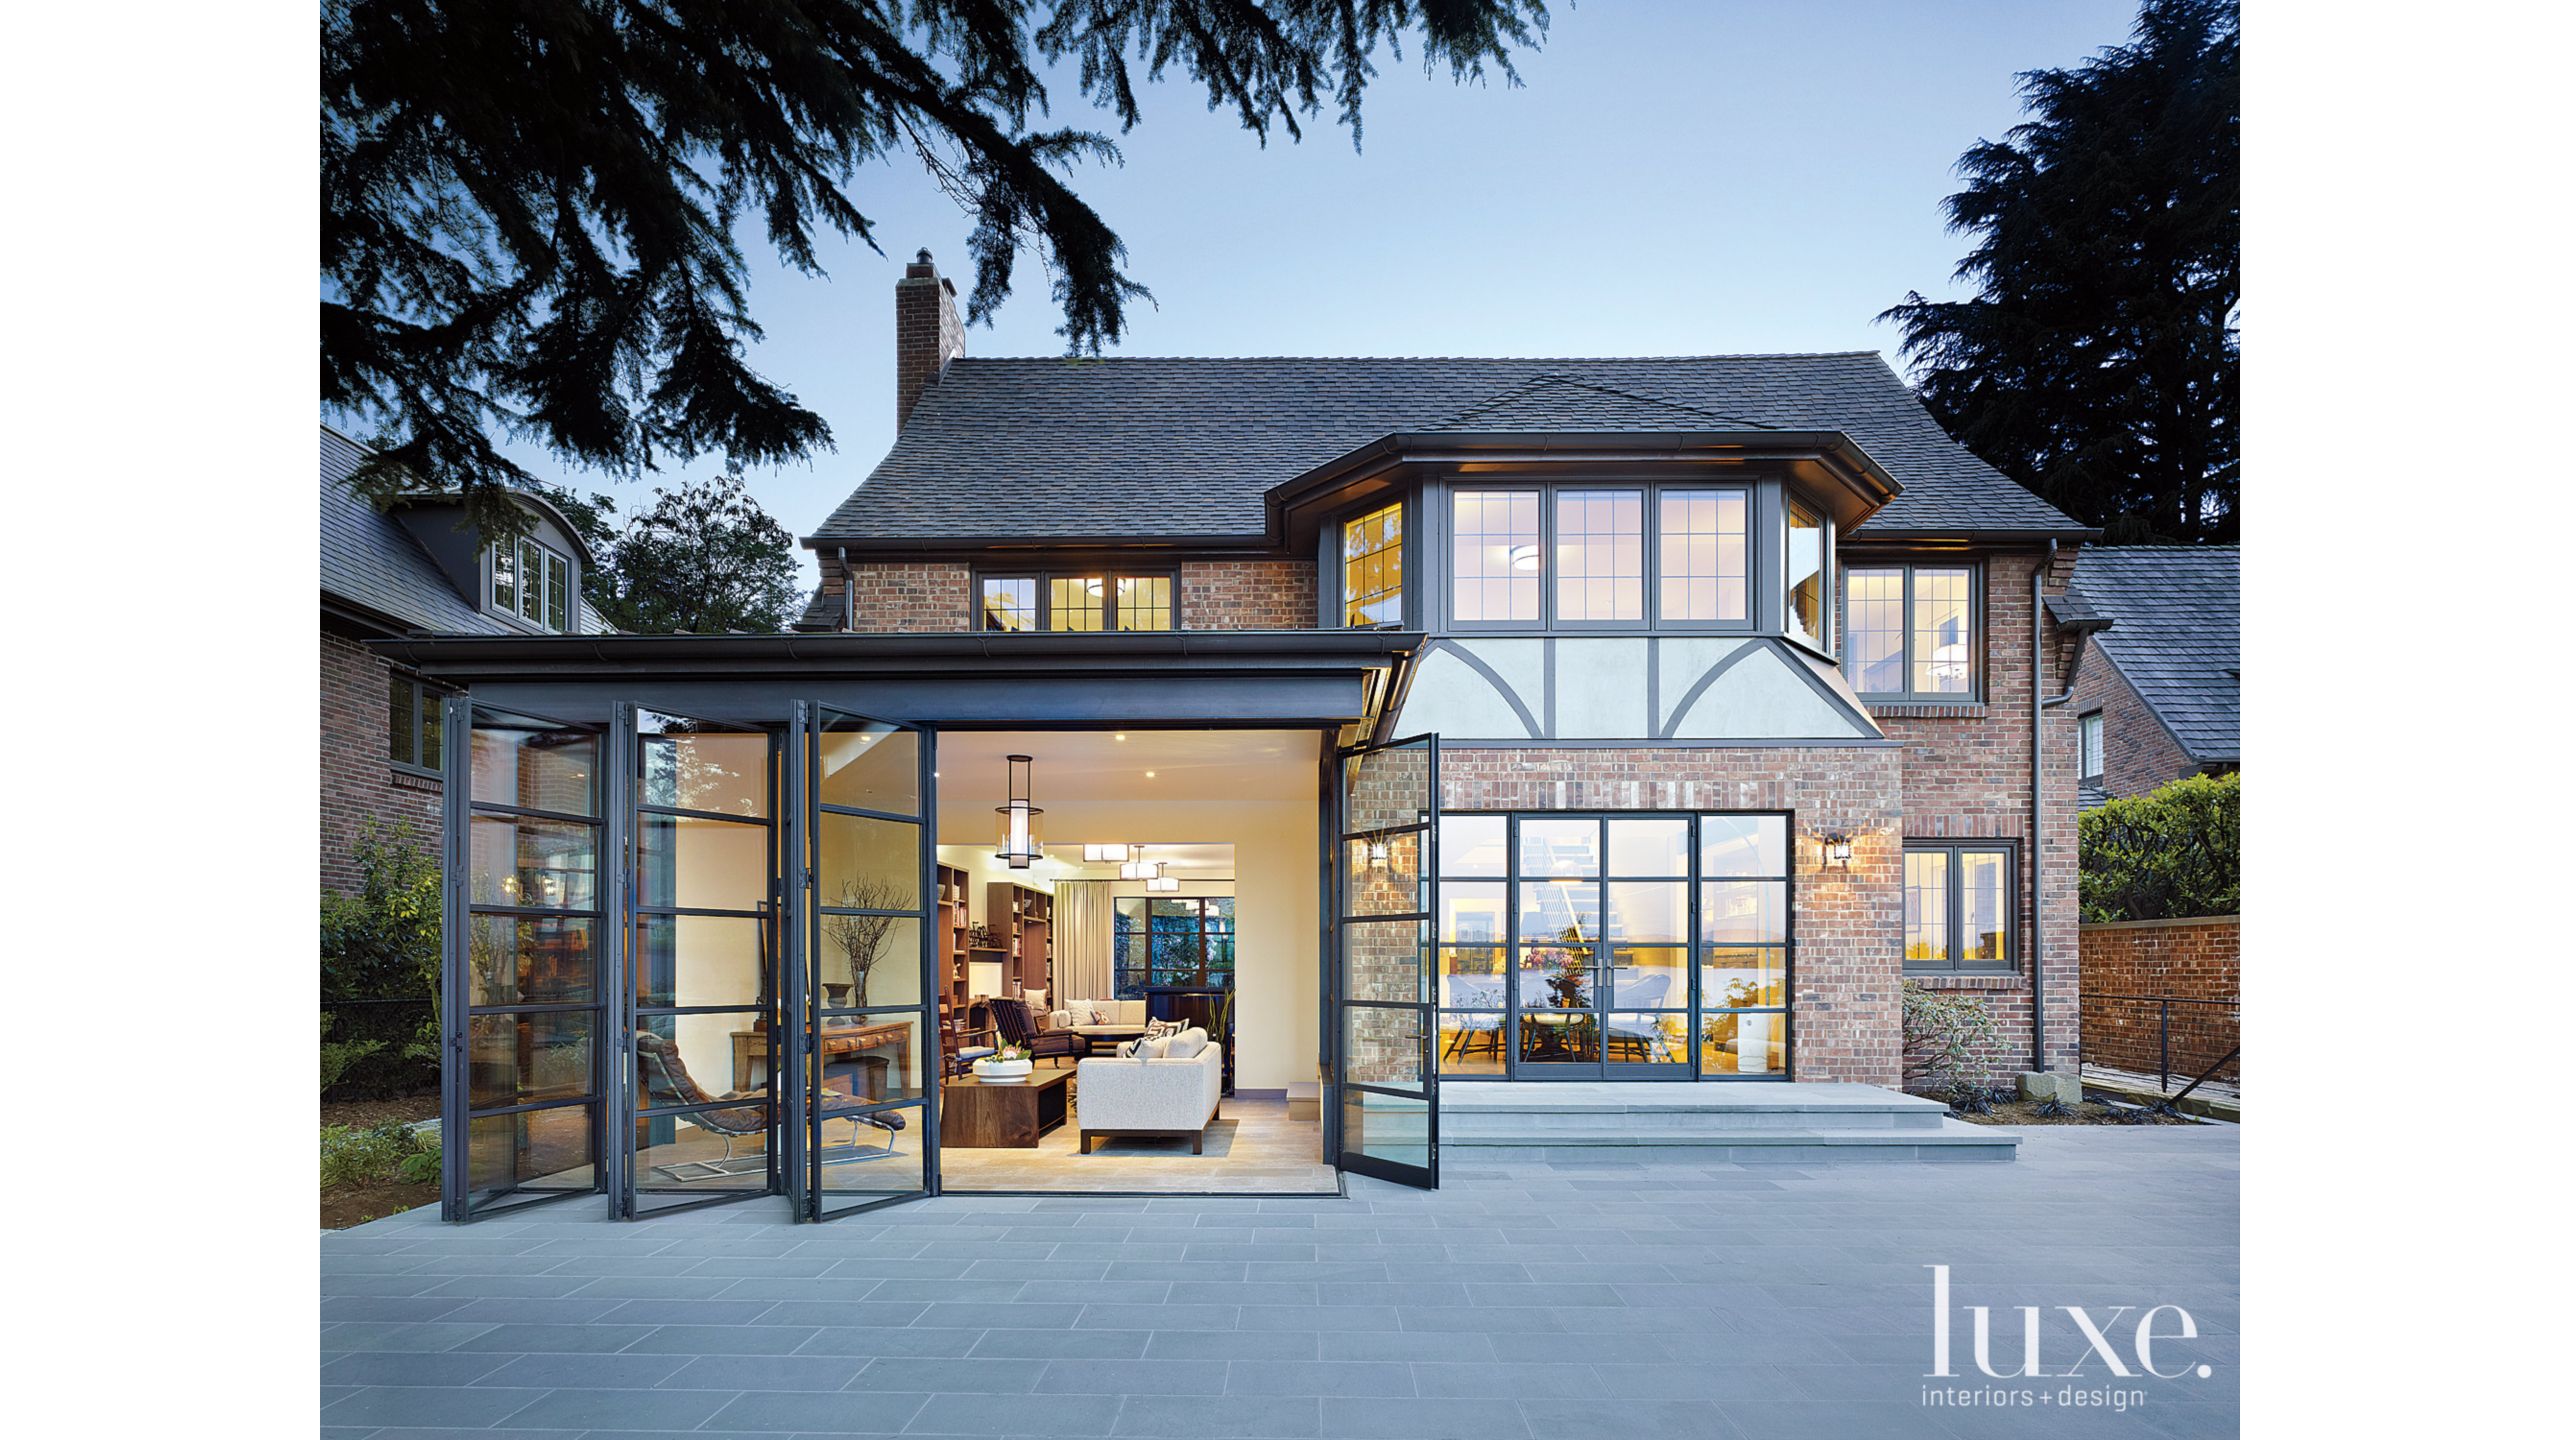 Classic Seattle Tudor Home With Contemporary Interiors